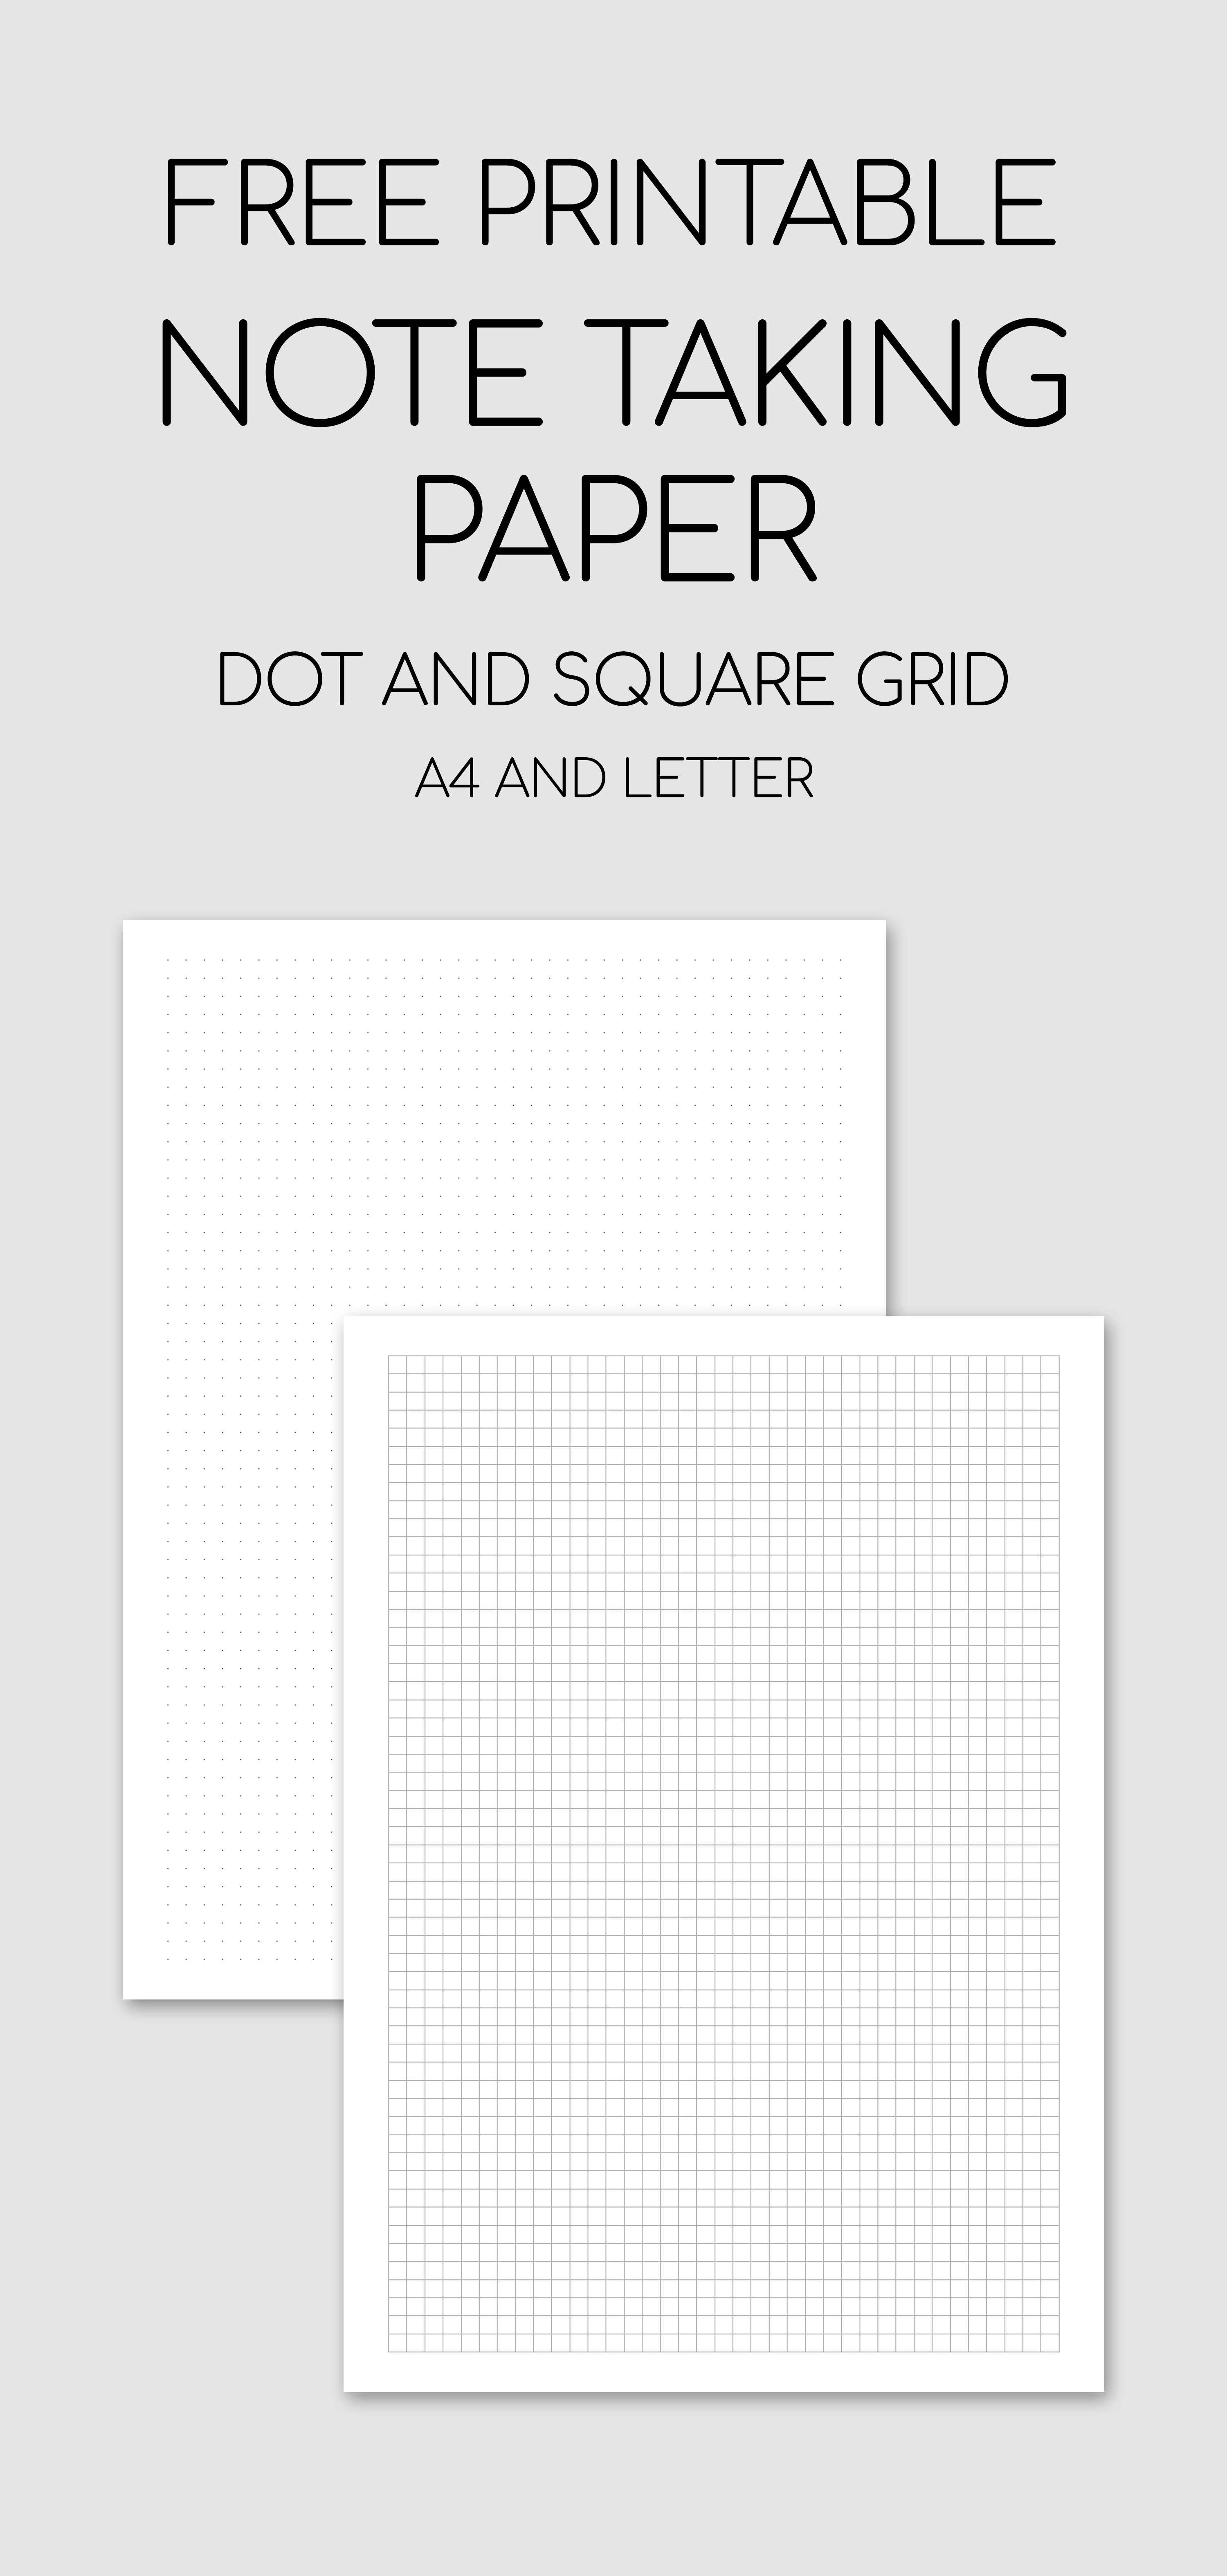 Free Printable Note Taking Paper - Dot And Square Grid #free - Free Printable Square Dot Paper